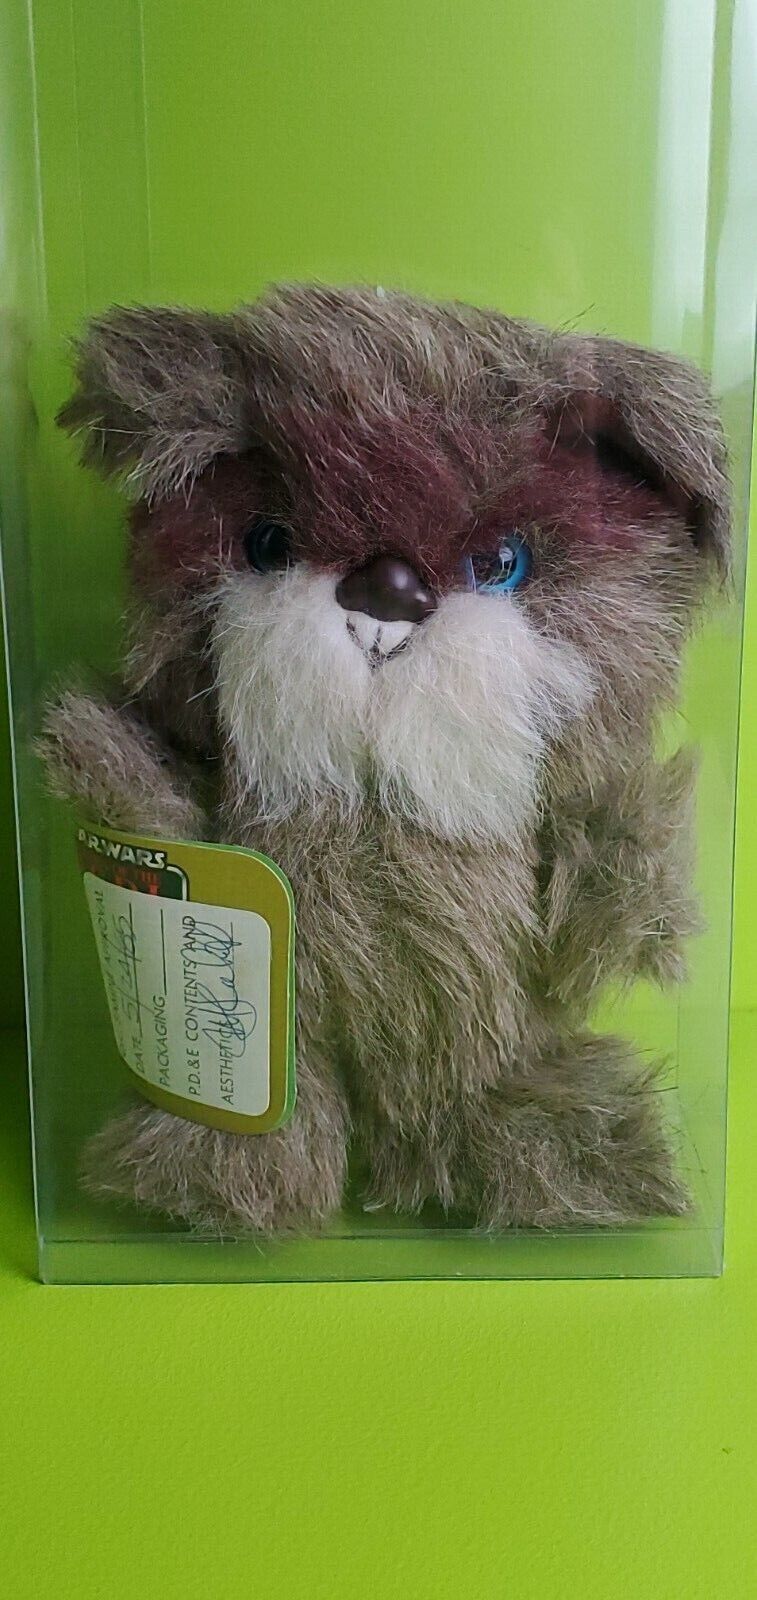 Vintage Star Wars Plush Ewok Kenner Prototype great condition. 1985 Q.C. signed.